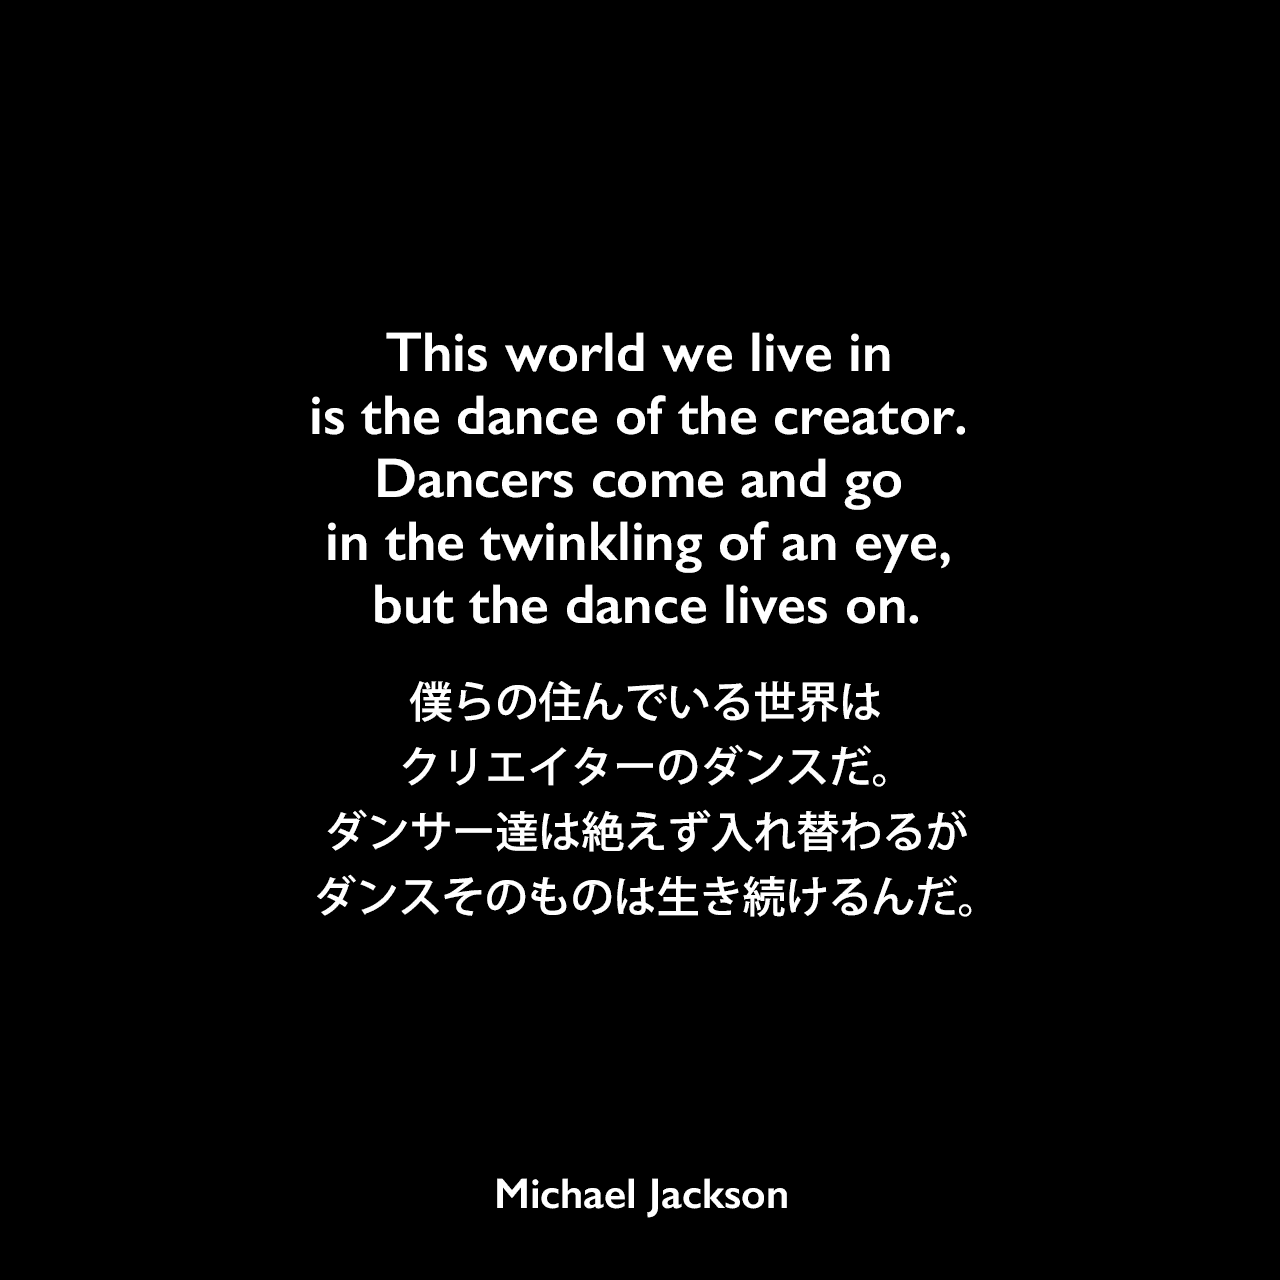 This world we live in is the dance of the creator. Dancers come and go in the twinkling of an eye, but the dance lives on.僕らの住んでいる世界は、クリエイターのダンスだ。ダンサー達は絶えず入れ替わるが、ダンスそのものは生き続けるんだ。Michael Jackson